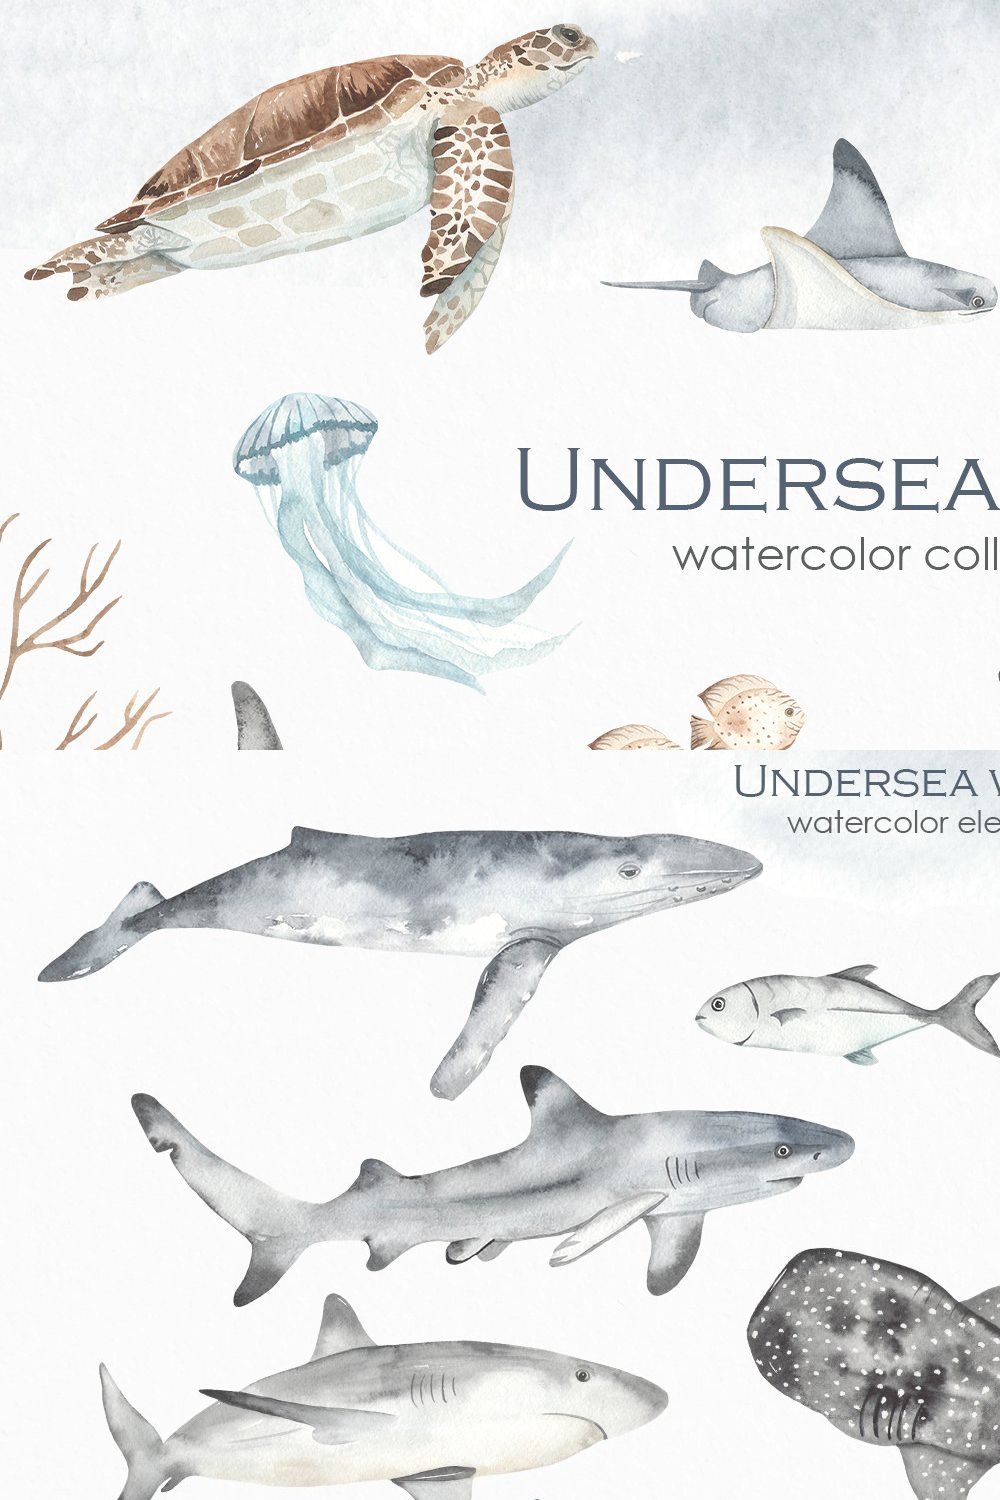 Undersea world Watercolor pinterest preview image.